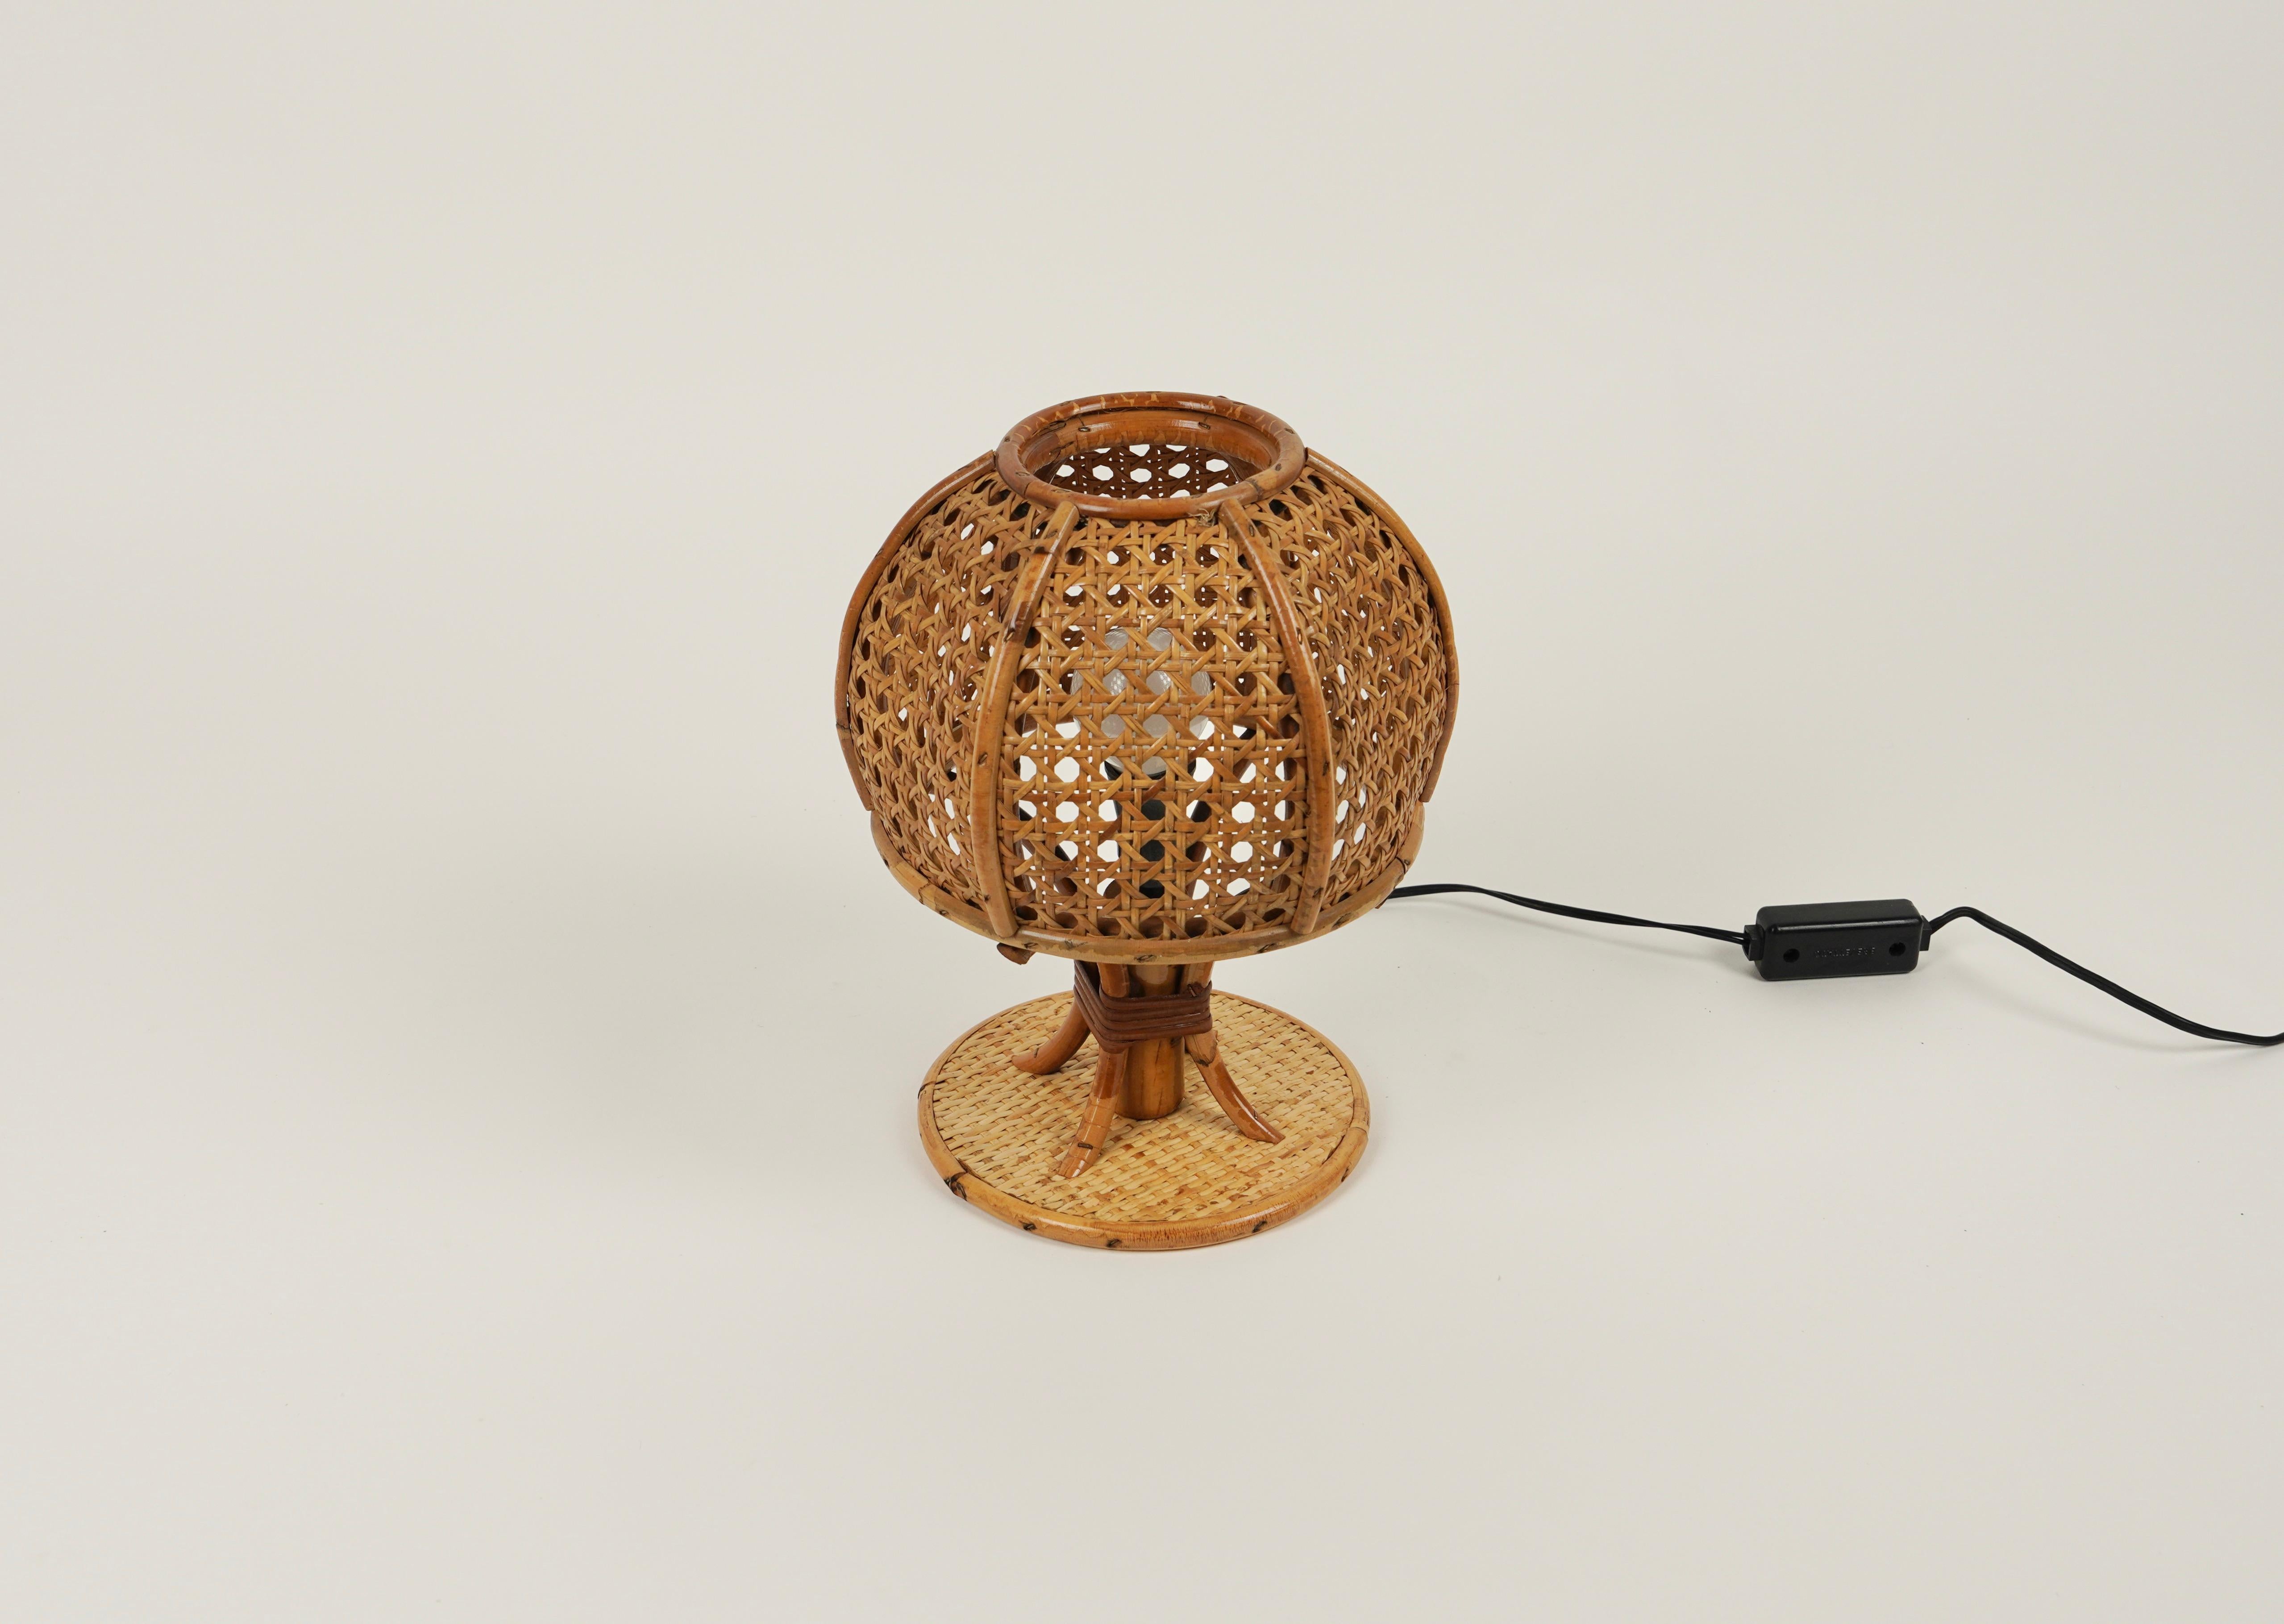 Bamboo Midcentury Rattan and Wicker Table Lamp Louis Sognot Style, Italy, circa 1970s For Sale